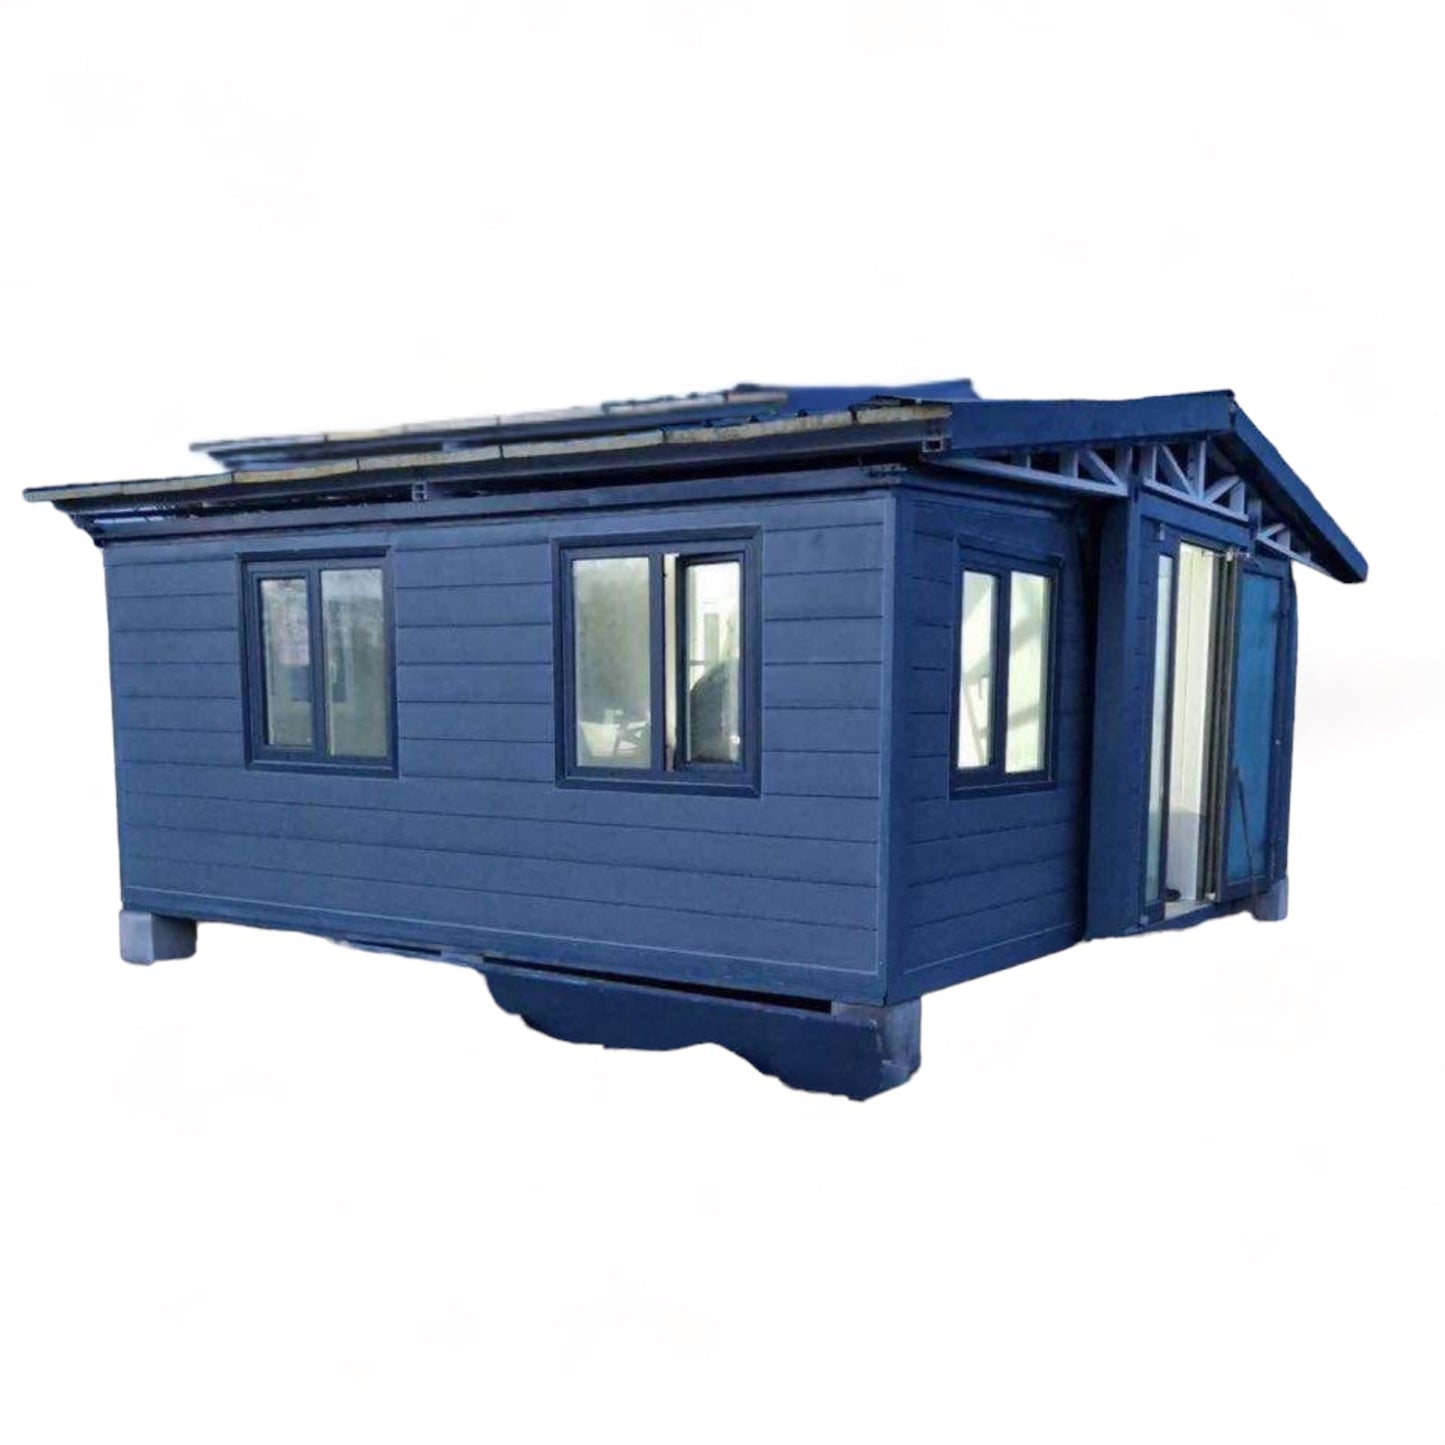 ALIWALI Foldable Tiny House (13x20ft) - Portable, Versatile Living Solution for Anywhere Living,Fully Furnished,for Office Work.